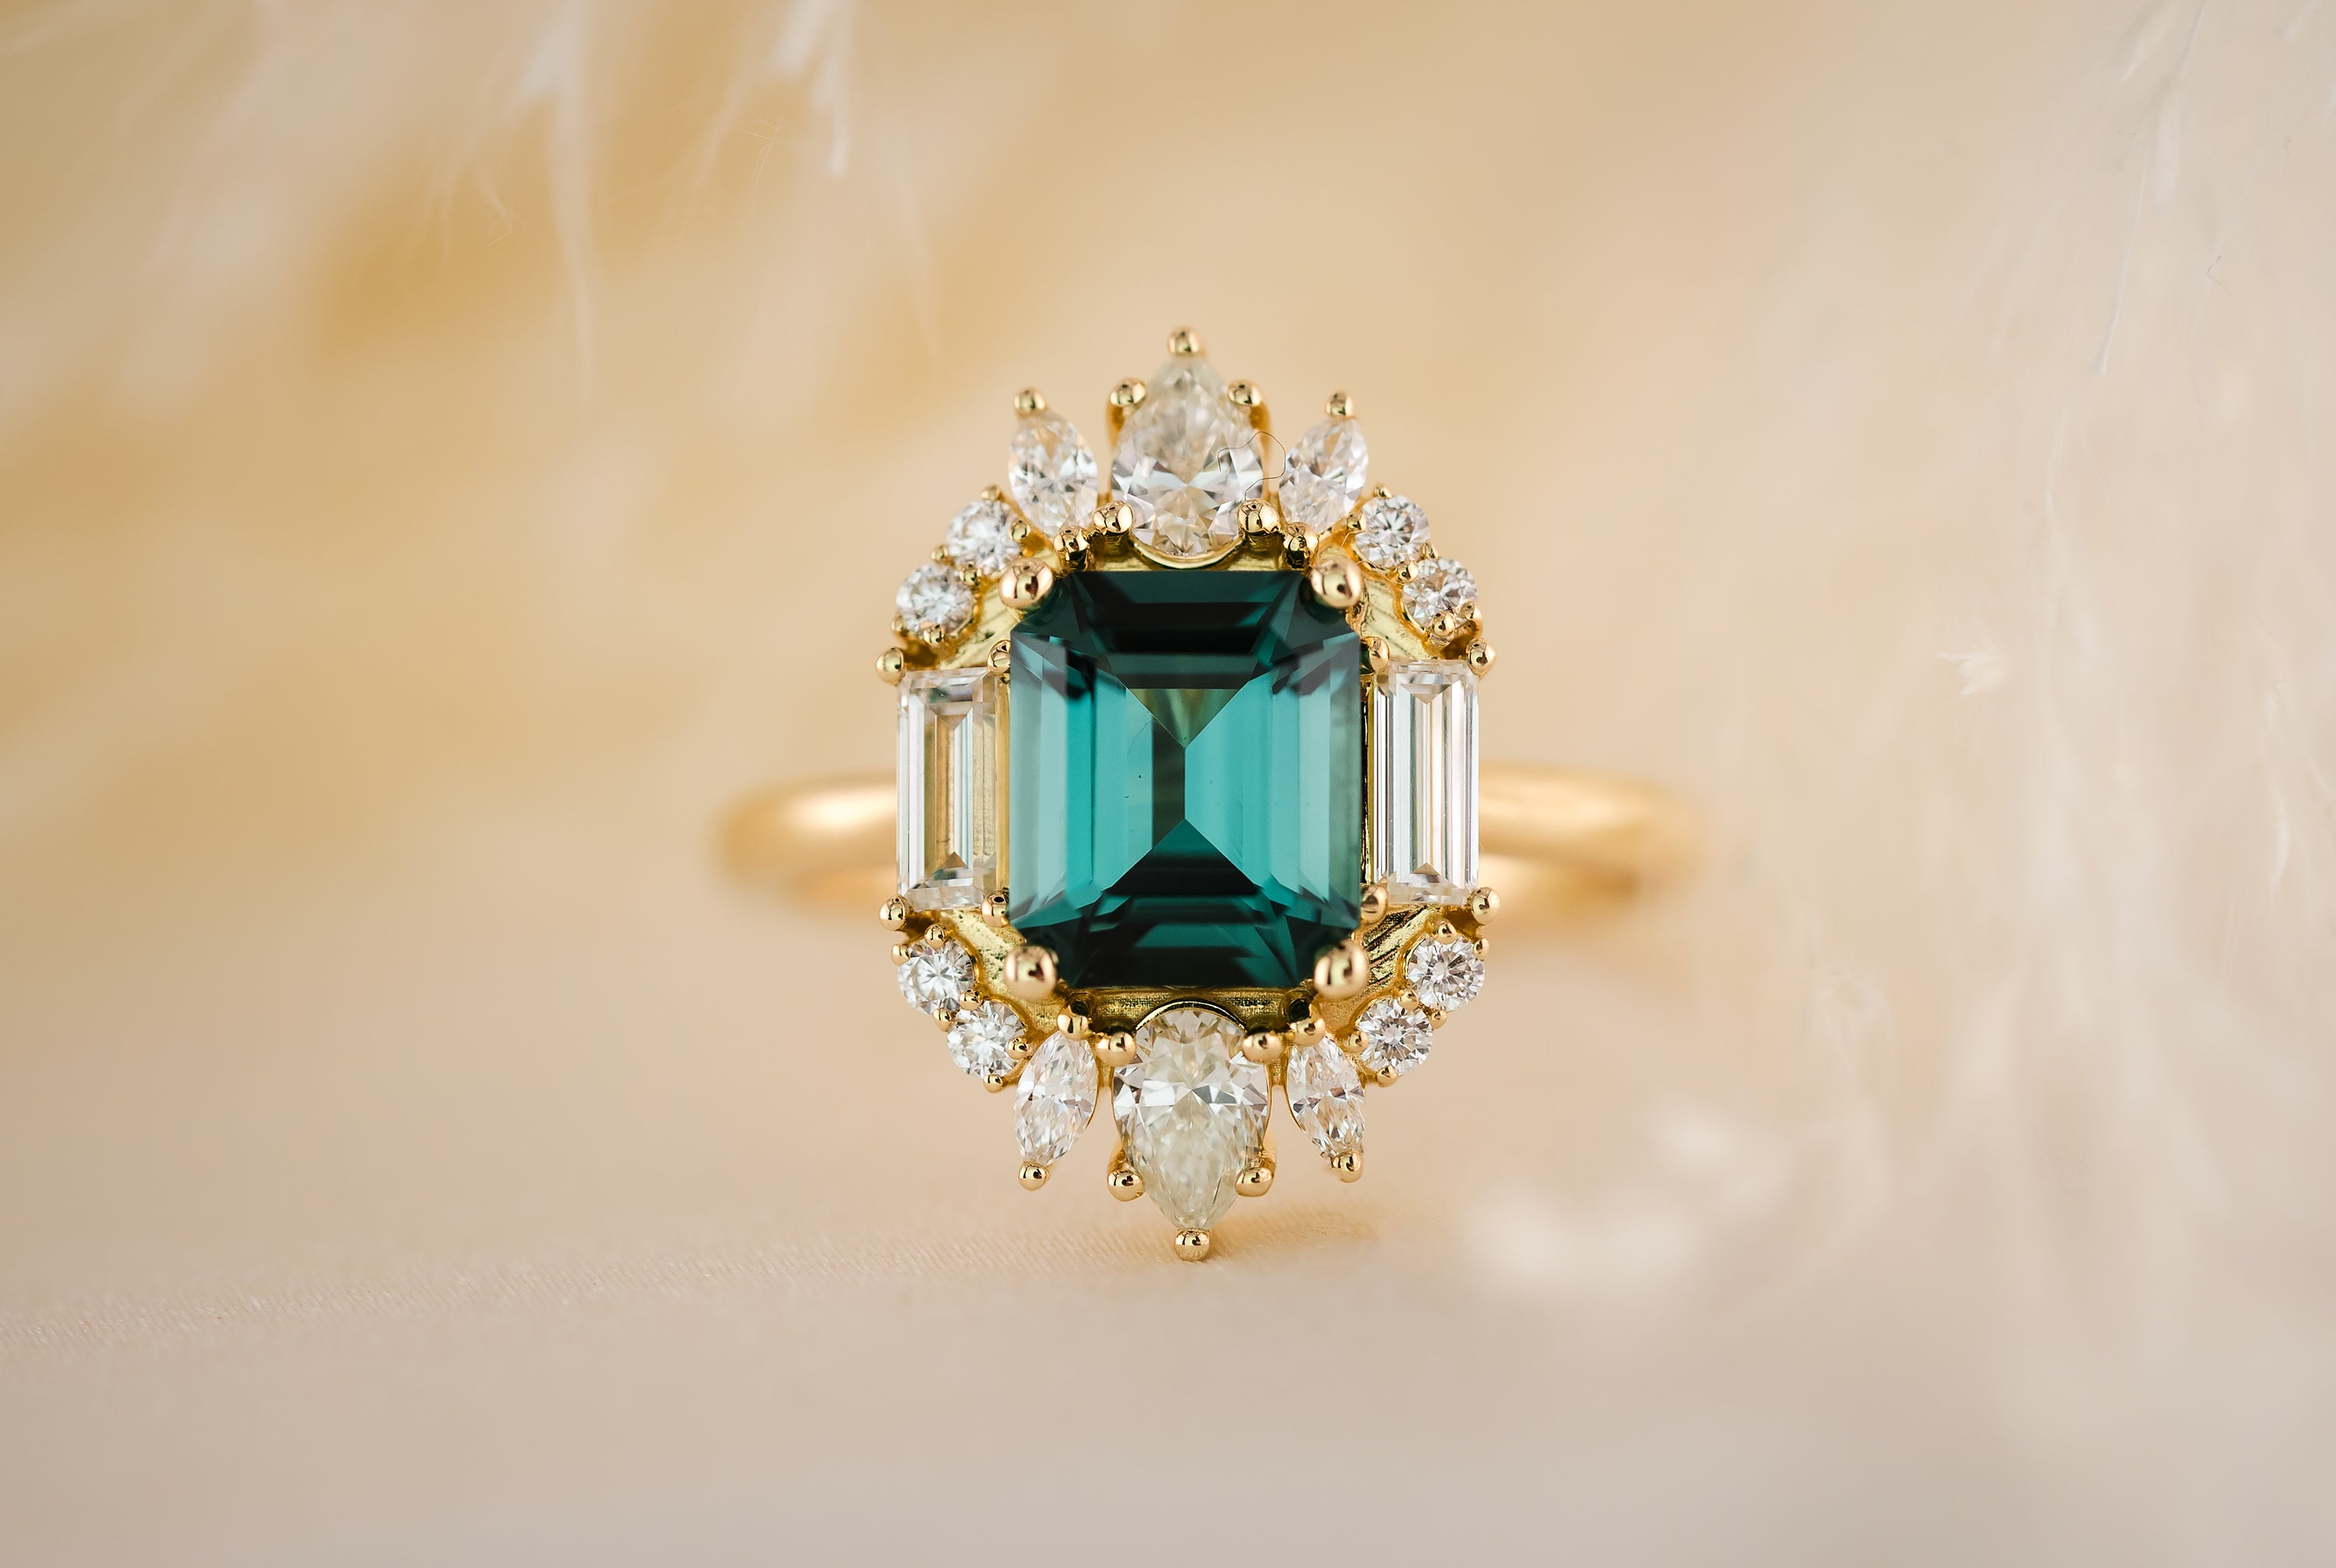 Buy 2 Carats Oval Indicolite Tourmaline Engagement Ring, Three Stone Teal  Green Tourmaline Promise Ring, Peacock Gemstone Ring, October Birthday  Online in India - Etsy